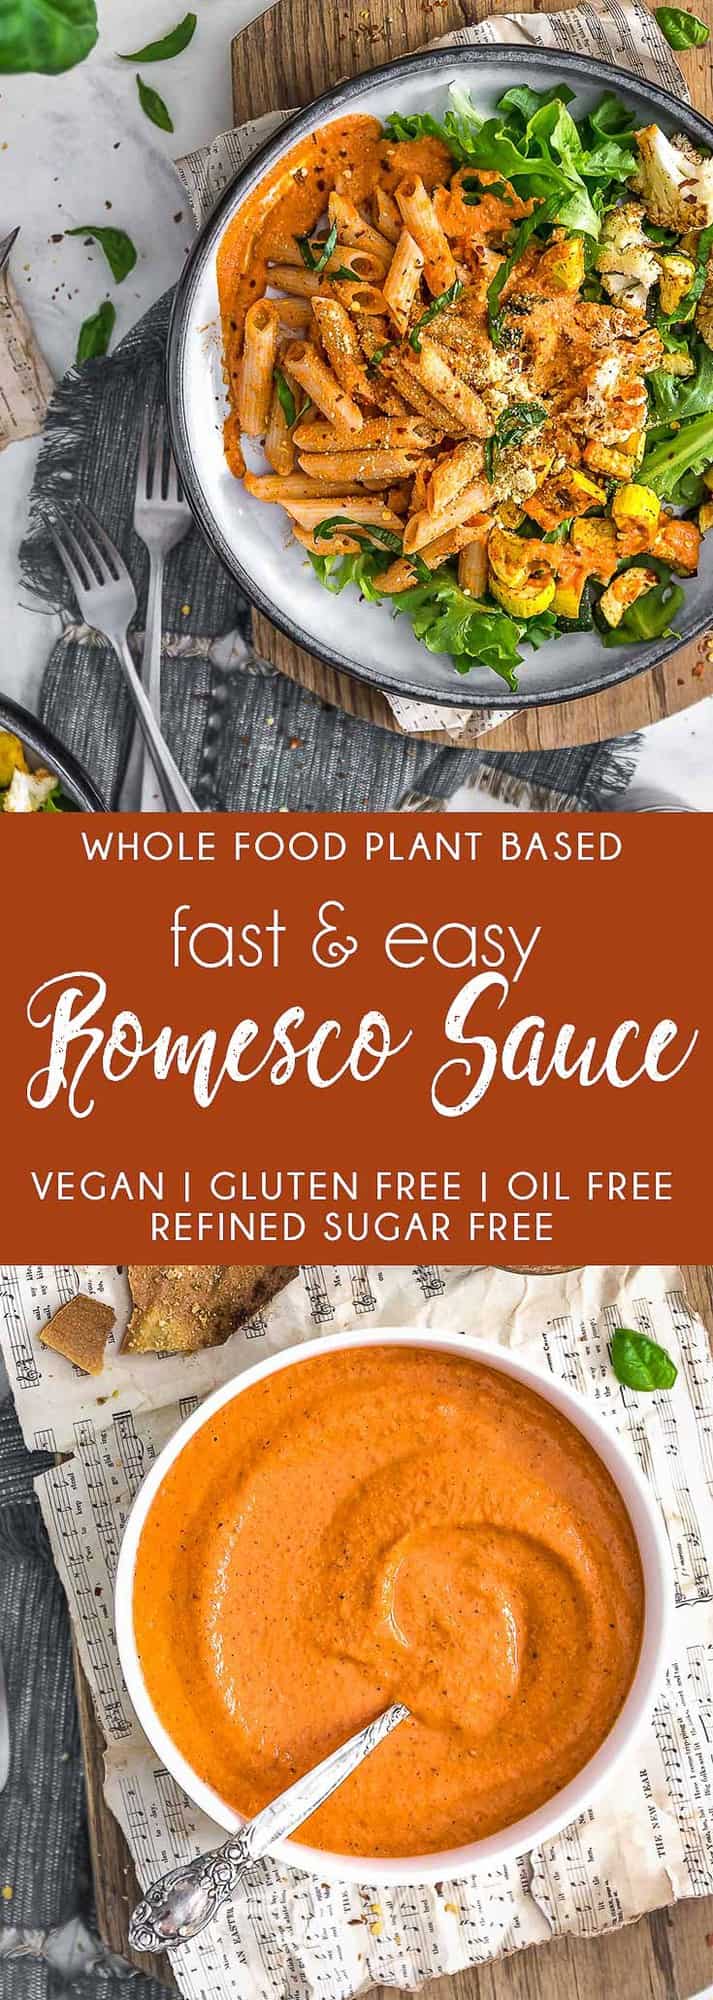 Fast and Easy Romesco Sauce, vegan sauce, vegan romesco, plant based romesco, plant based, vegan, vegetarian, whole food plant based, gluten free, recipe, wfpb, healthy, healthy vegan, oil free, no refined sugar, no oil, refined sugar free, dairy free, dinner party, entertaining, dinner, lunch, pasta, pasta sauce, sauce, pepper sauce, peppers, fast recipe, easy recipe, quick recipe, 30 minute meal, 15 minute meal, 10 minute meal, dip, appetizer